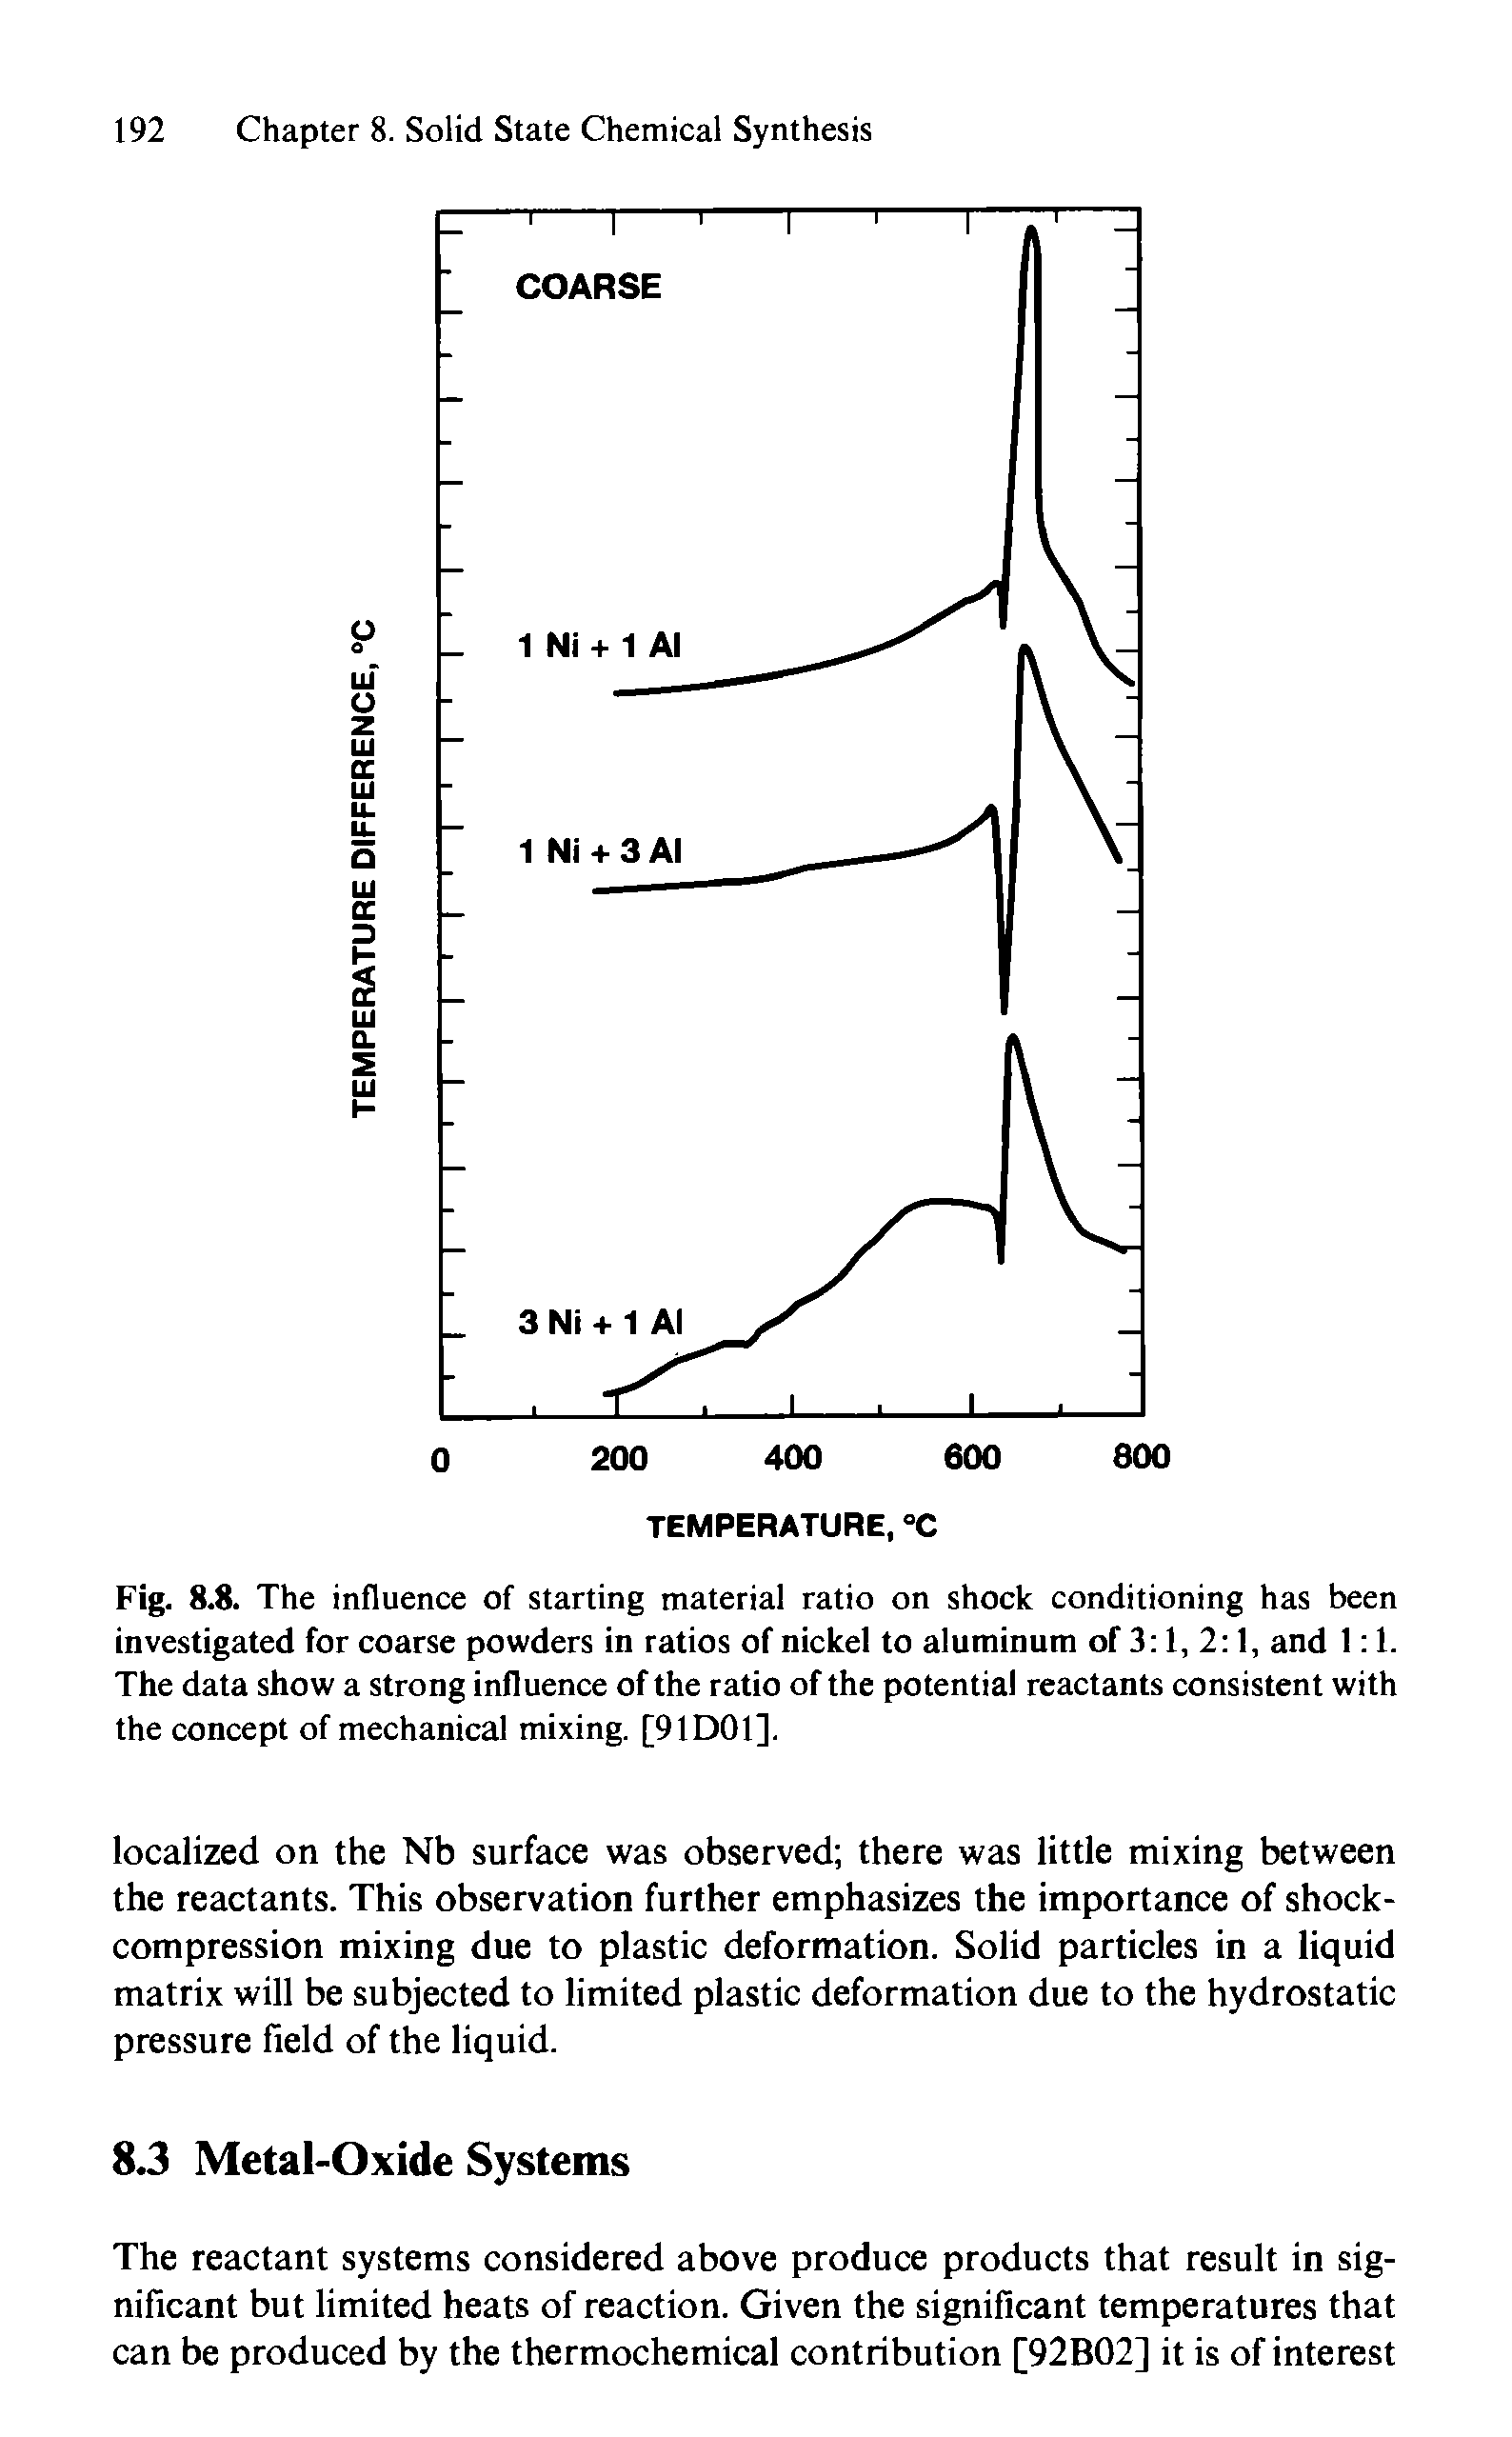 Fig. 8.8. The influence of starting material ratio on shock conditioning has been investigated for coarse powders in ratios of nickel to aluminum of 3 1, 2 1, and 1 1. The data show a strong influence of the ratio of the potential reactants consistent with the concept of mechanical mixing. [91D01],...